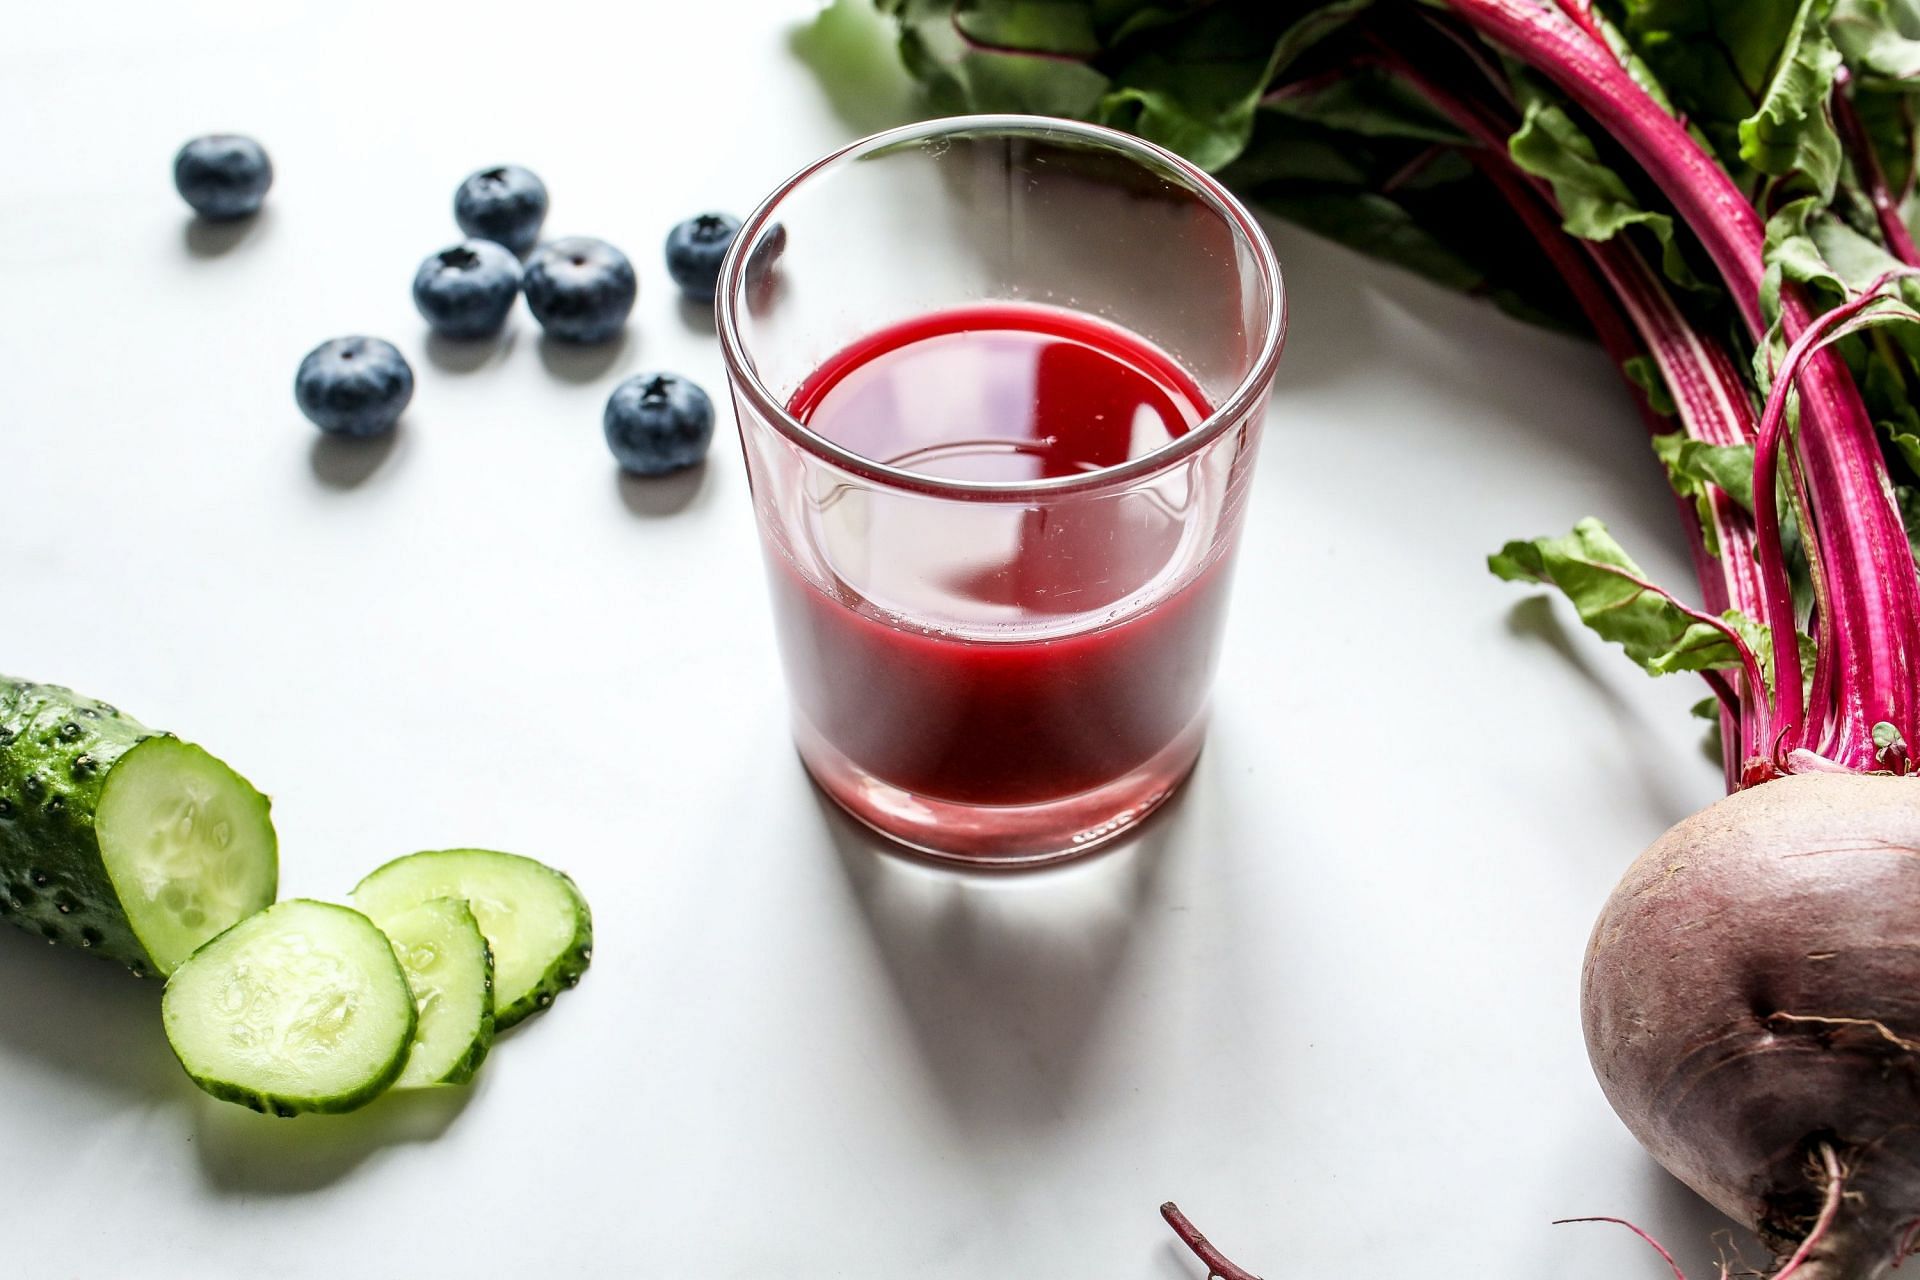 Beetroot juice, also known as beet juice, is a popular health drink made from the root vegetable known as a beet (Image via Pexels)